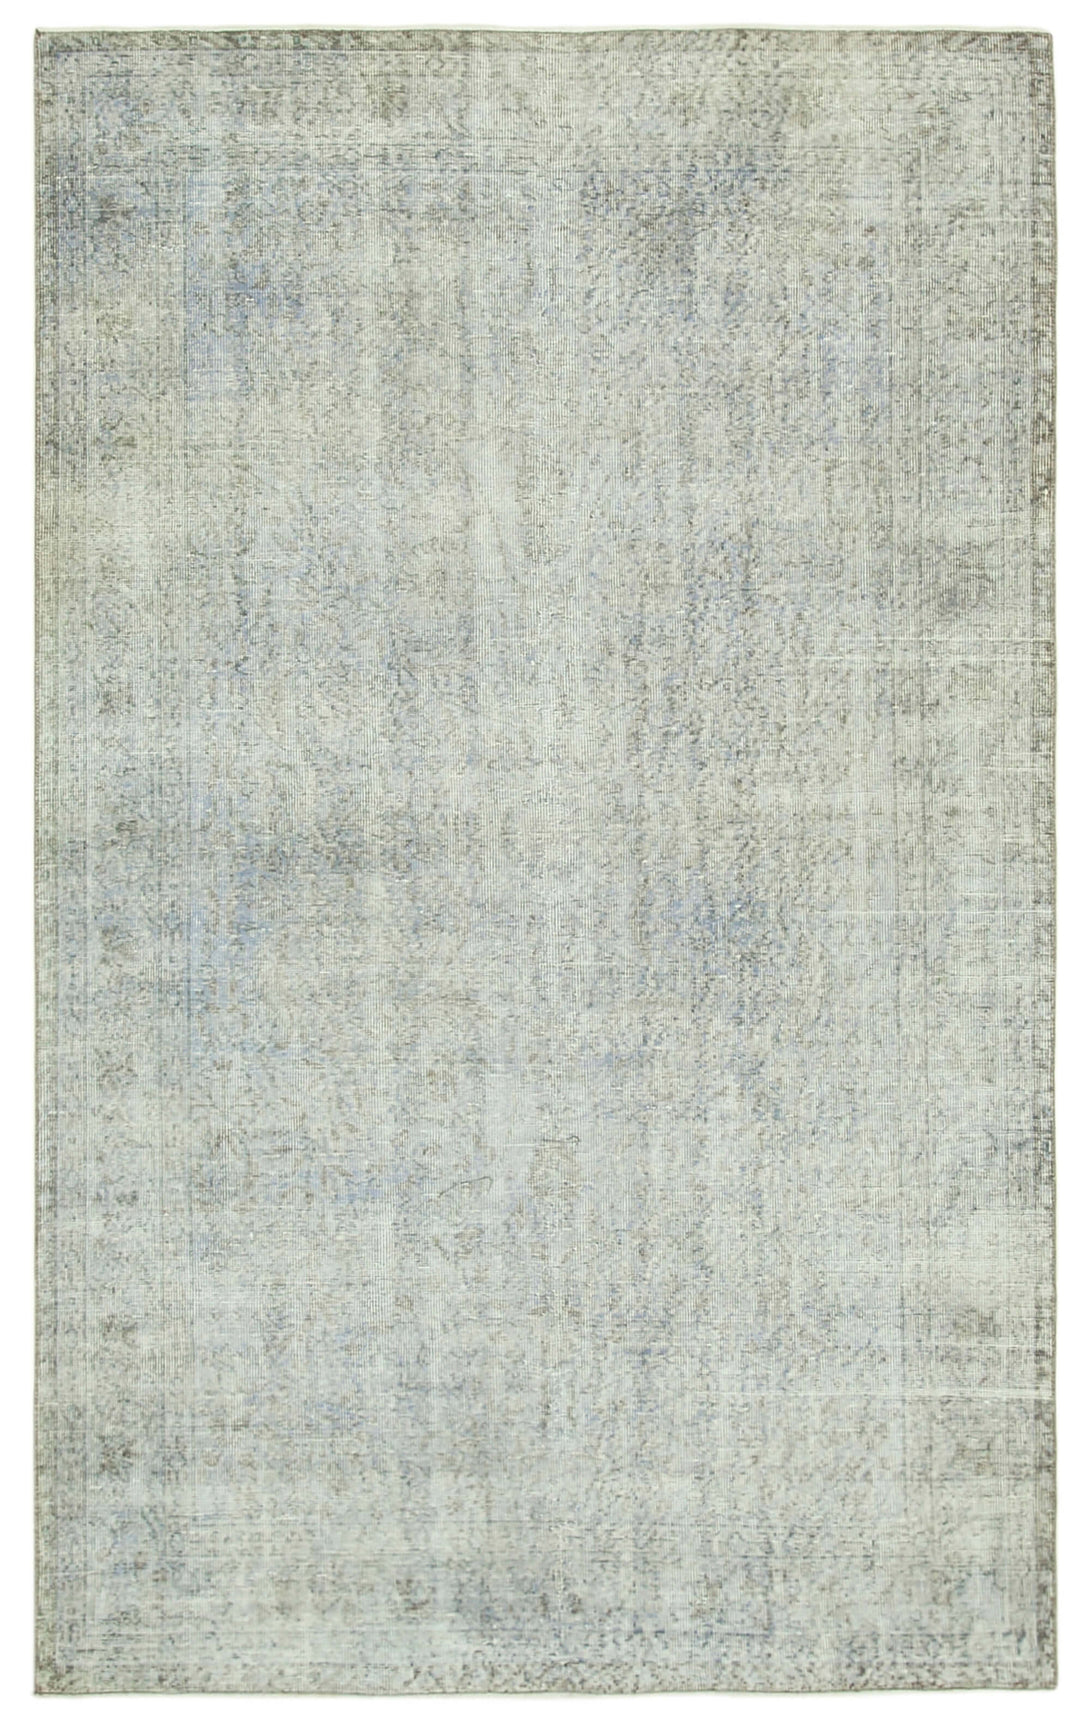 Handmade Overdyed Area Rug > Design# OL-AC-39370 > Size: 5'-7" x 8'-10", Carpet Culture Rugs, Handmade Rugs, NYC Rugs, New Rugs, Shop Rugs, Rug Store, Outlet Rugs, SoHo Rugs, Rugs in USA